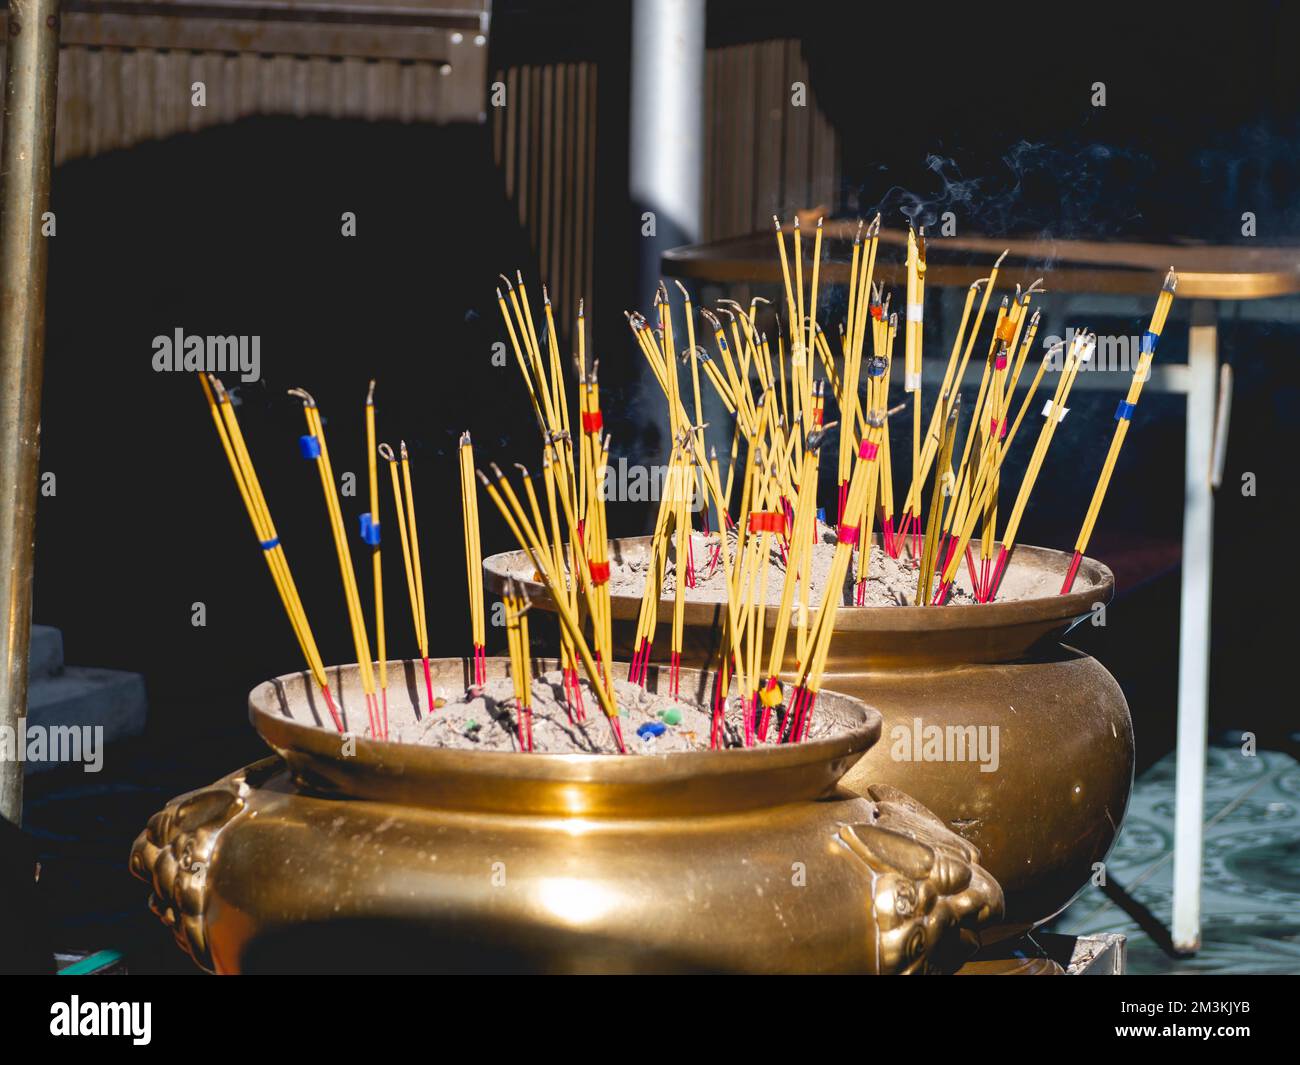 Golden incense burner and many incense sticks in a Thai temple Stock Photo